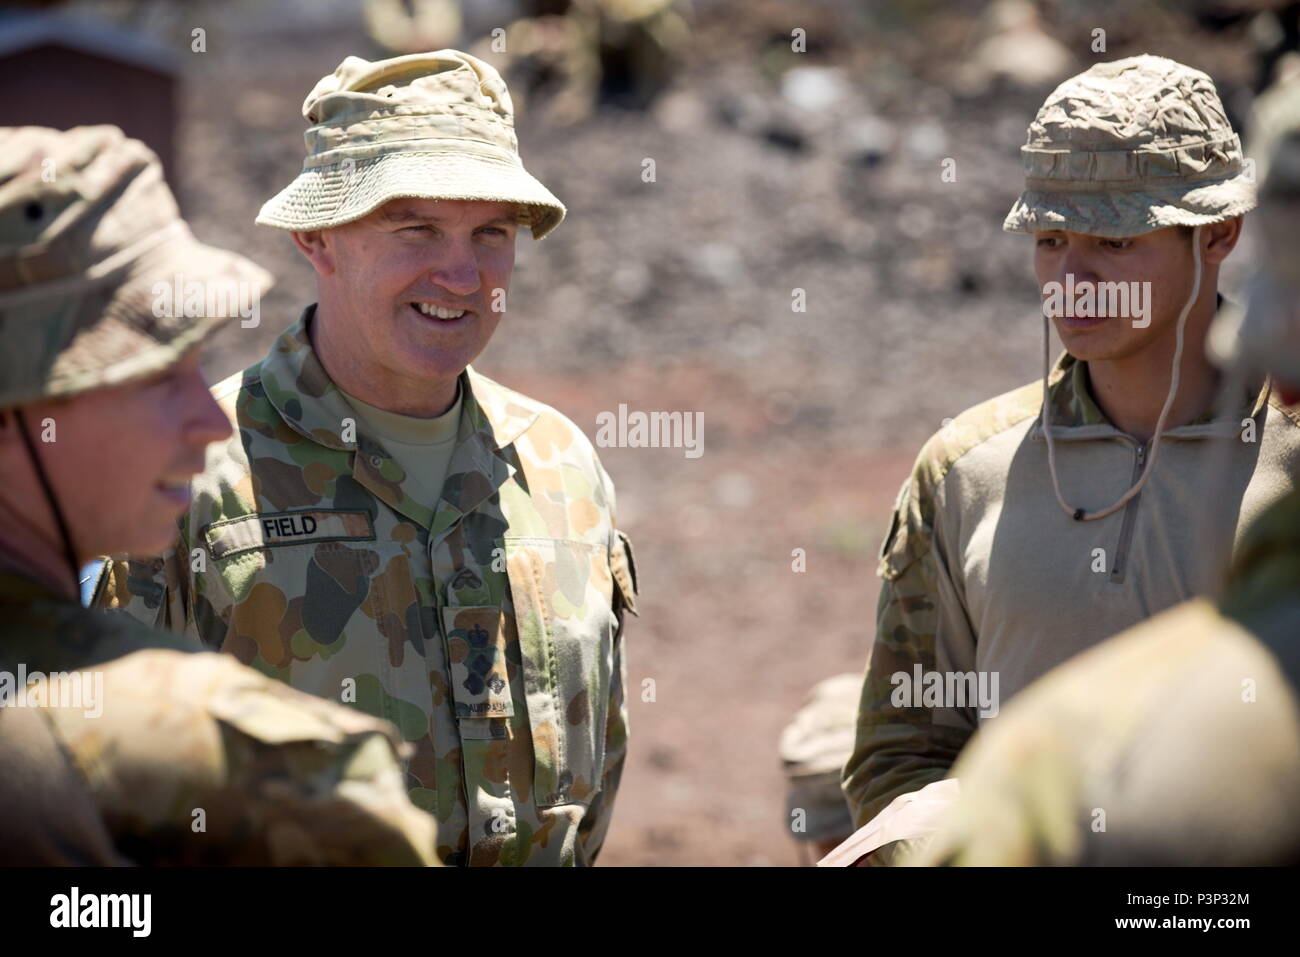 Army officer Brigadier Christopher Field left), CSC, Commander of 3rd Brigade, talks with Australian Army soldiers from 2nd Battalion, Royal Australian Regiment, at Pohakuloa training area, Hawaii, during Exercise Rim